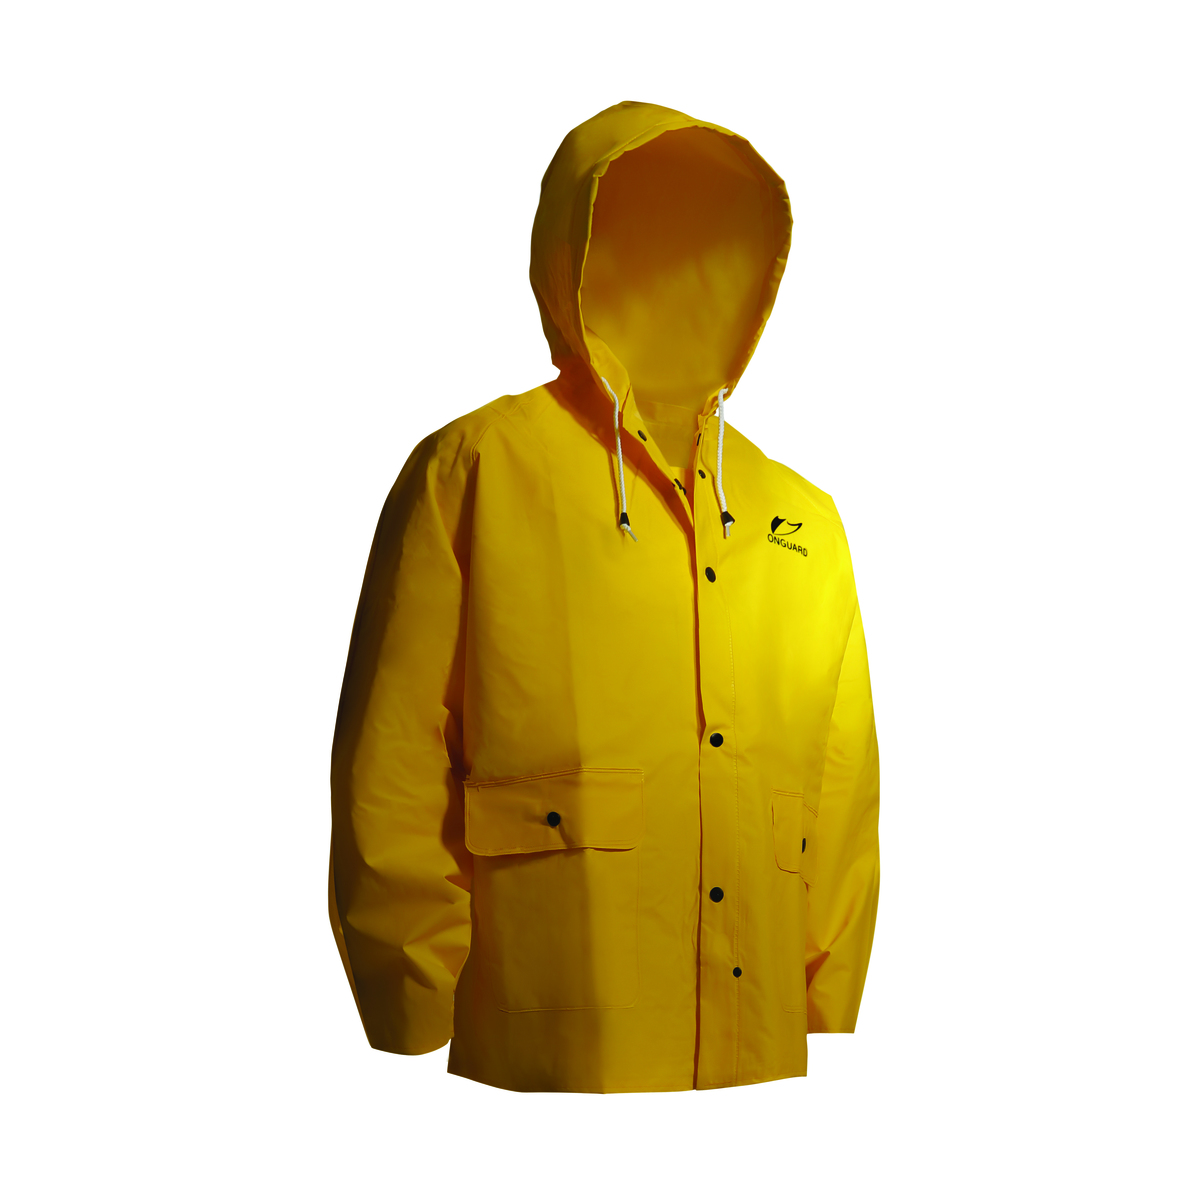 Dunlop® Protective Footwear X-Large Yellow Tuftex .3 mm Nylon/PVC Scrim Rain Jacket With Attached Hood